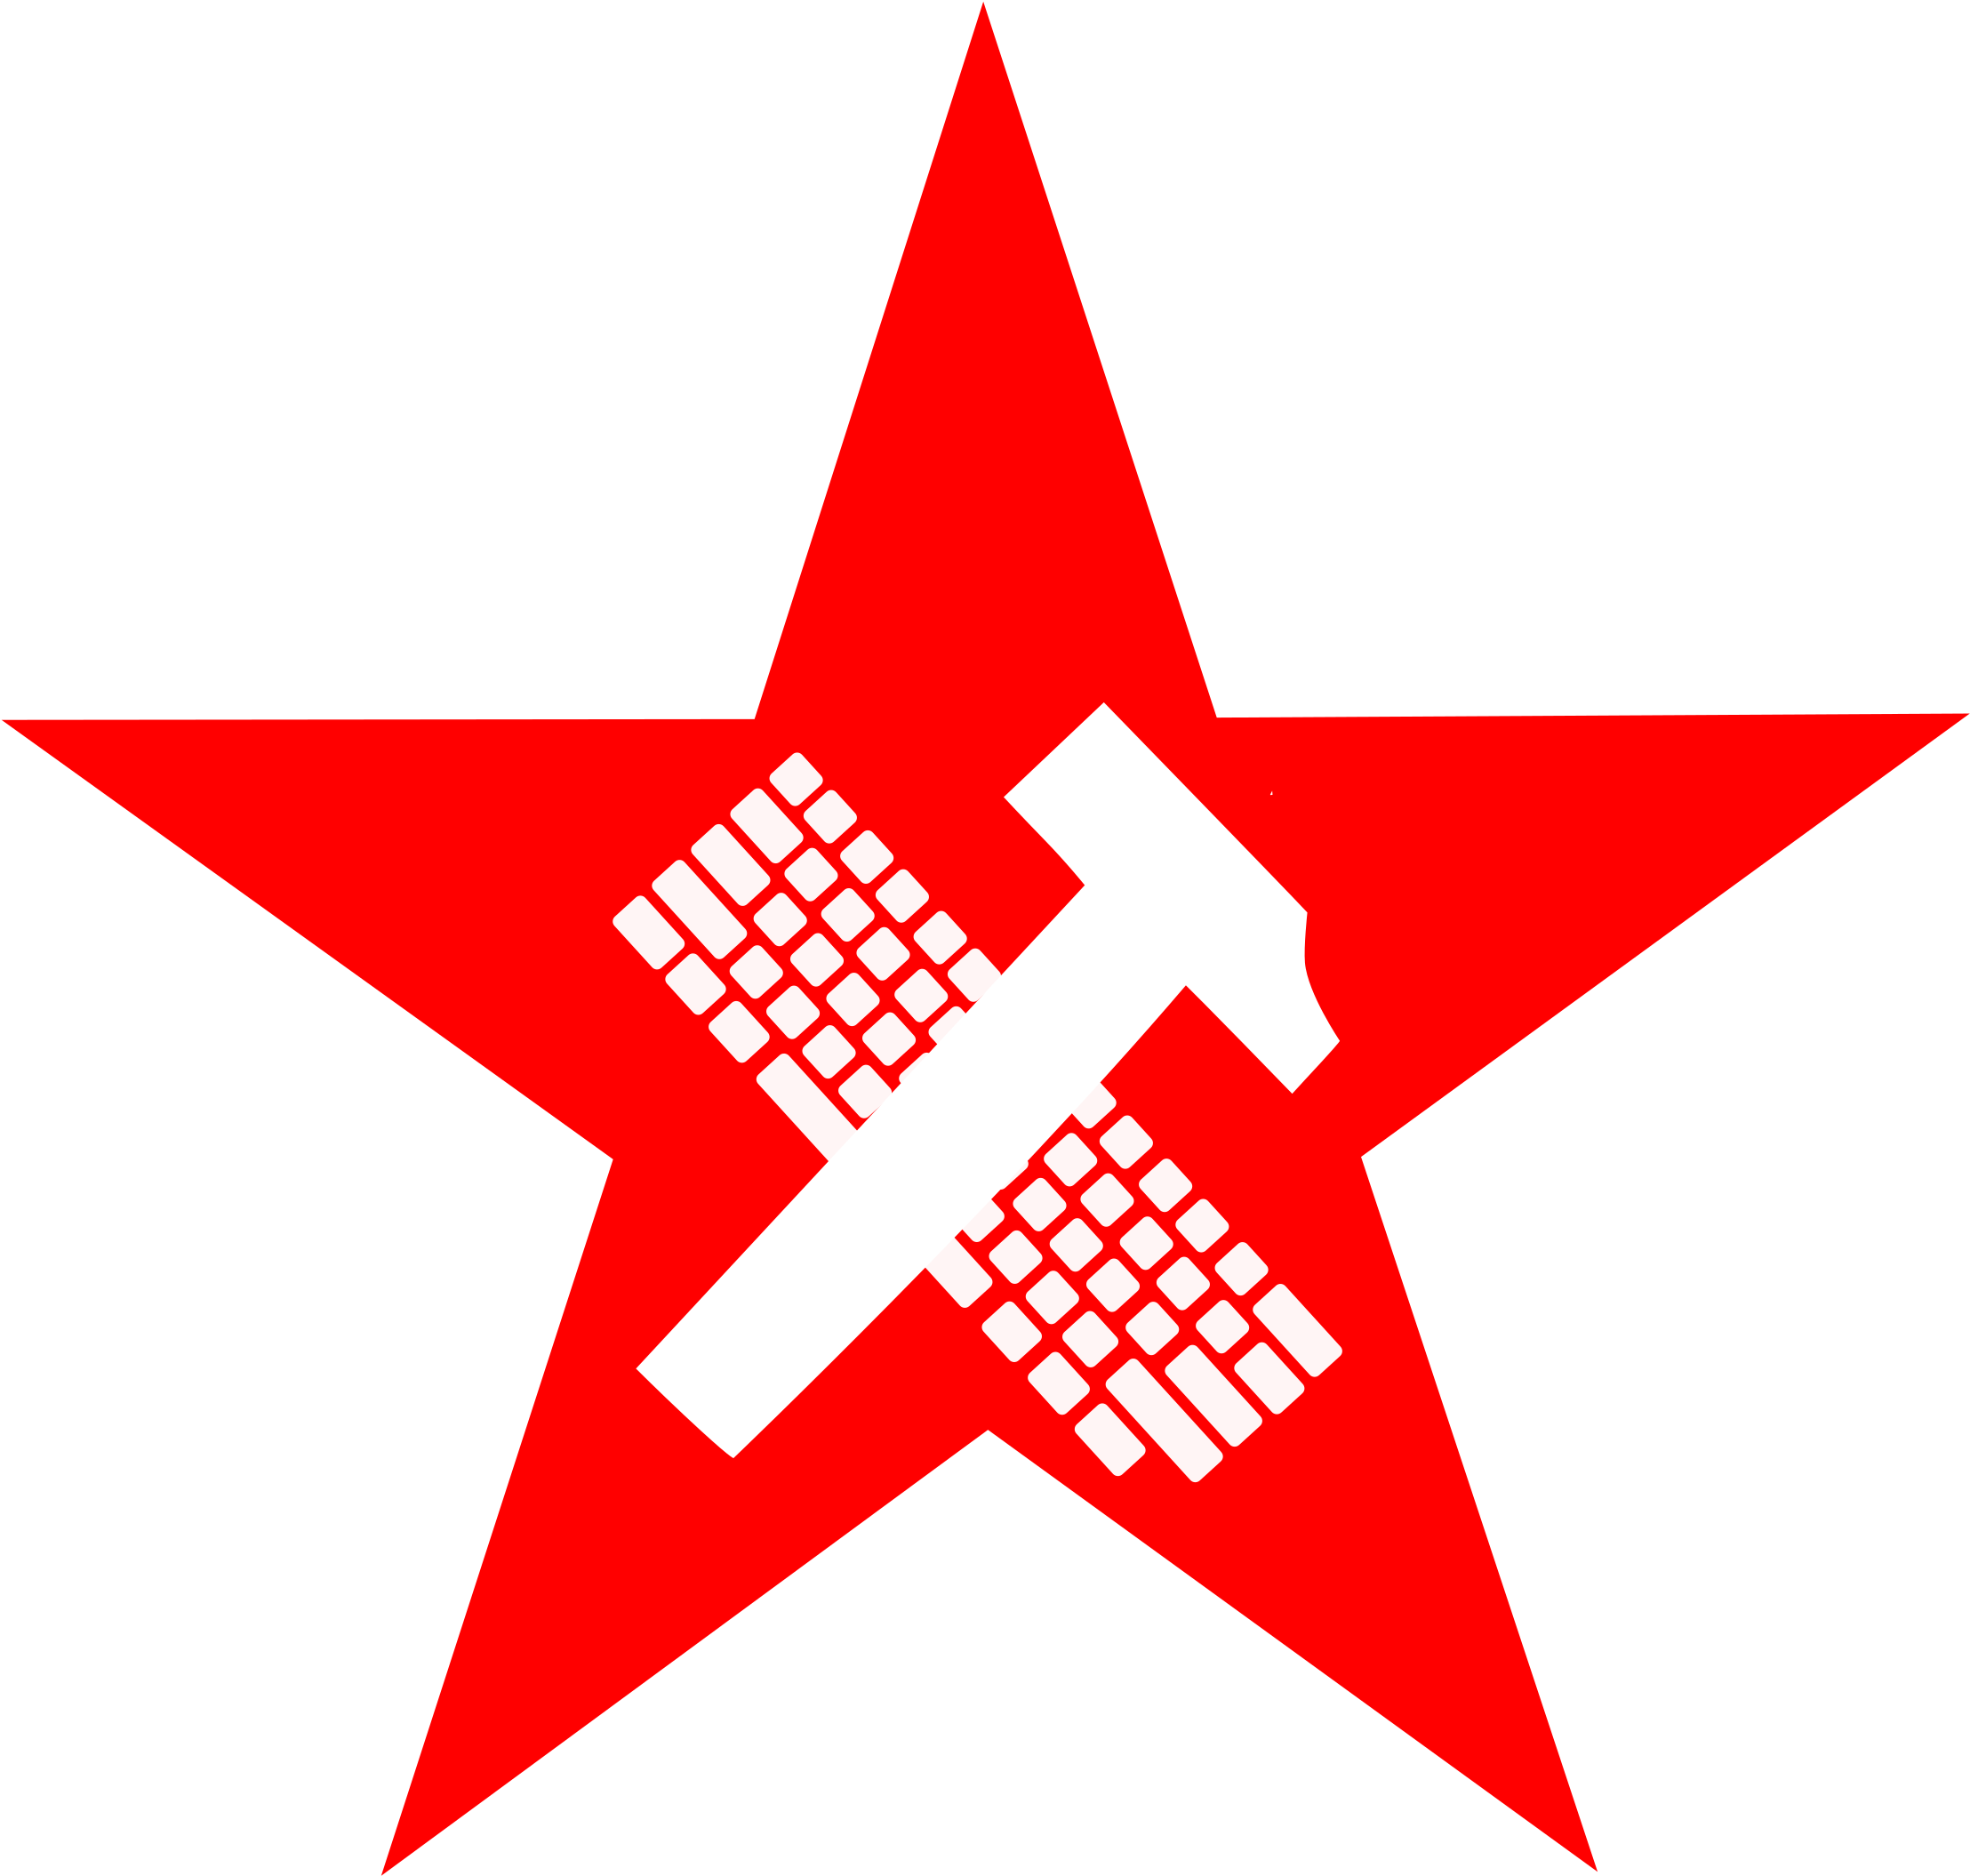 Hammer And Keyboard In Star - Communist Hammer And Sickle Pin (2400x2285)